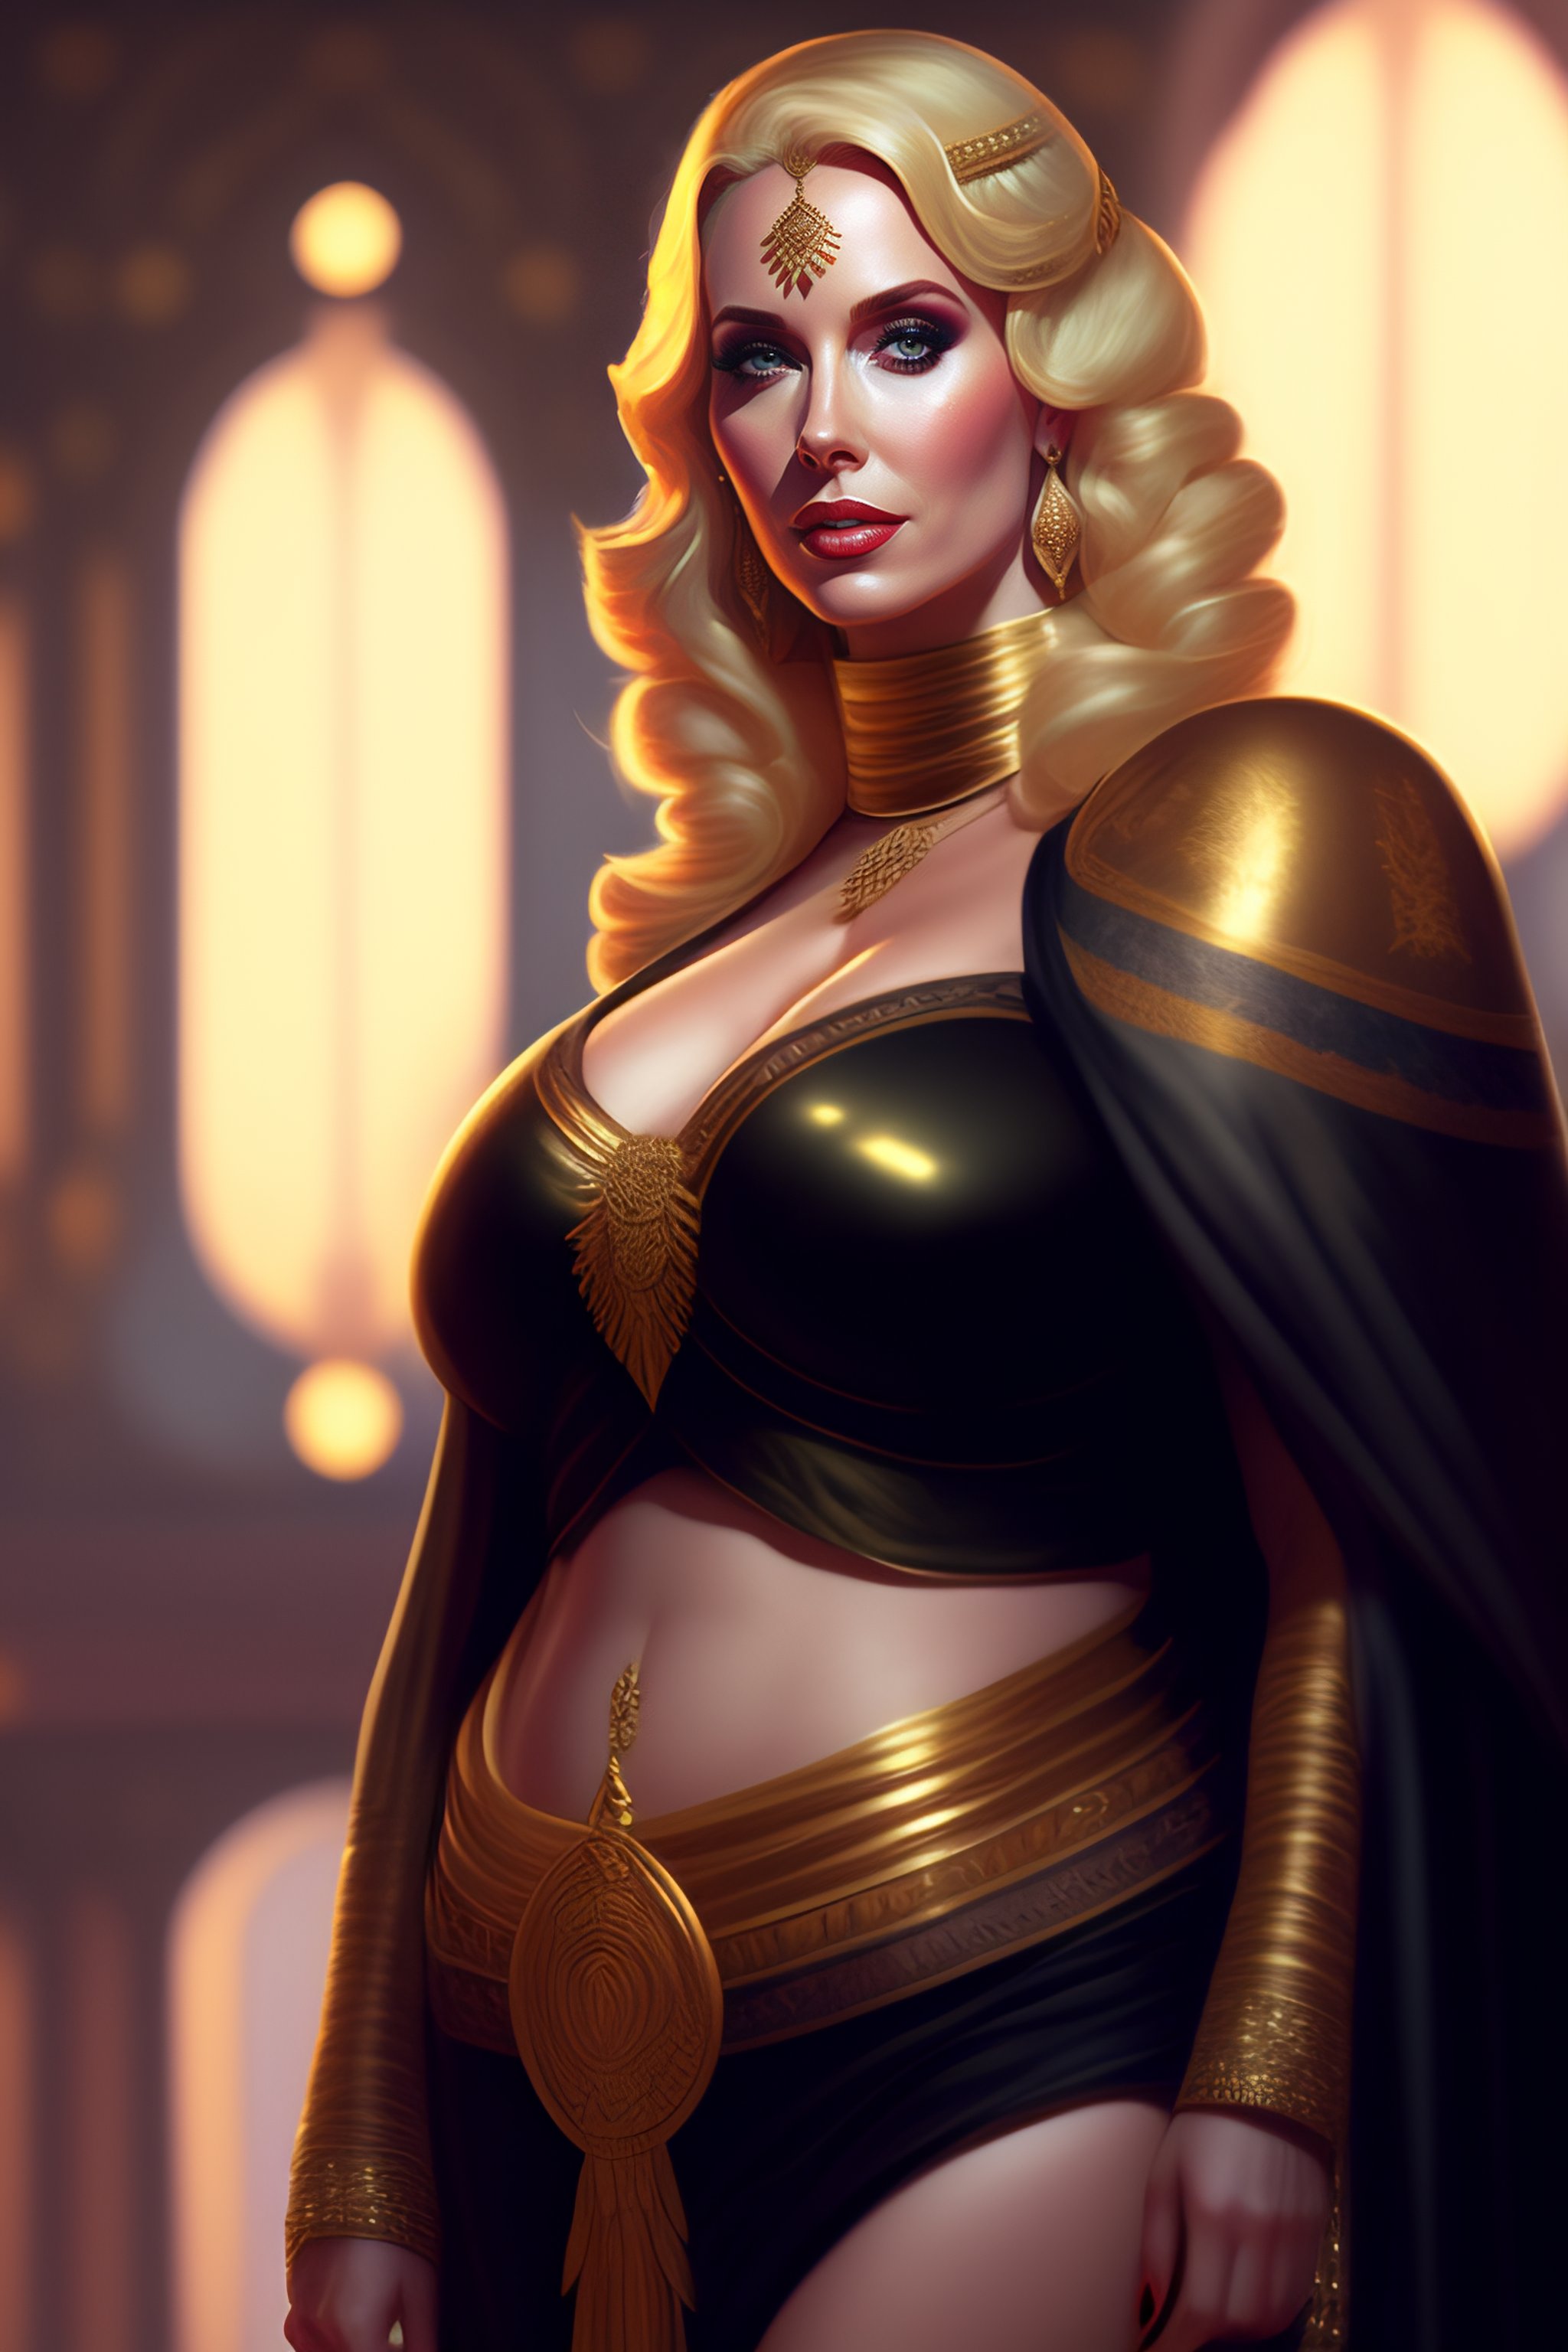 Lexica - Christina Hendricks as a belly dancer, leia, Charlize Theron  blonde updo, full body shot, barefoot, illustration, by jordan grimmer and  greg...